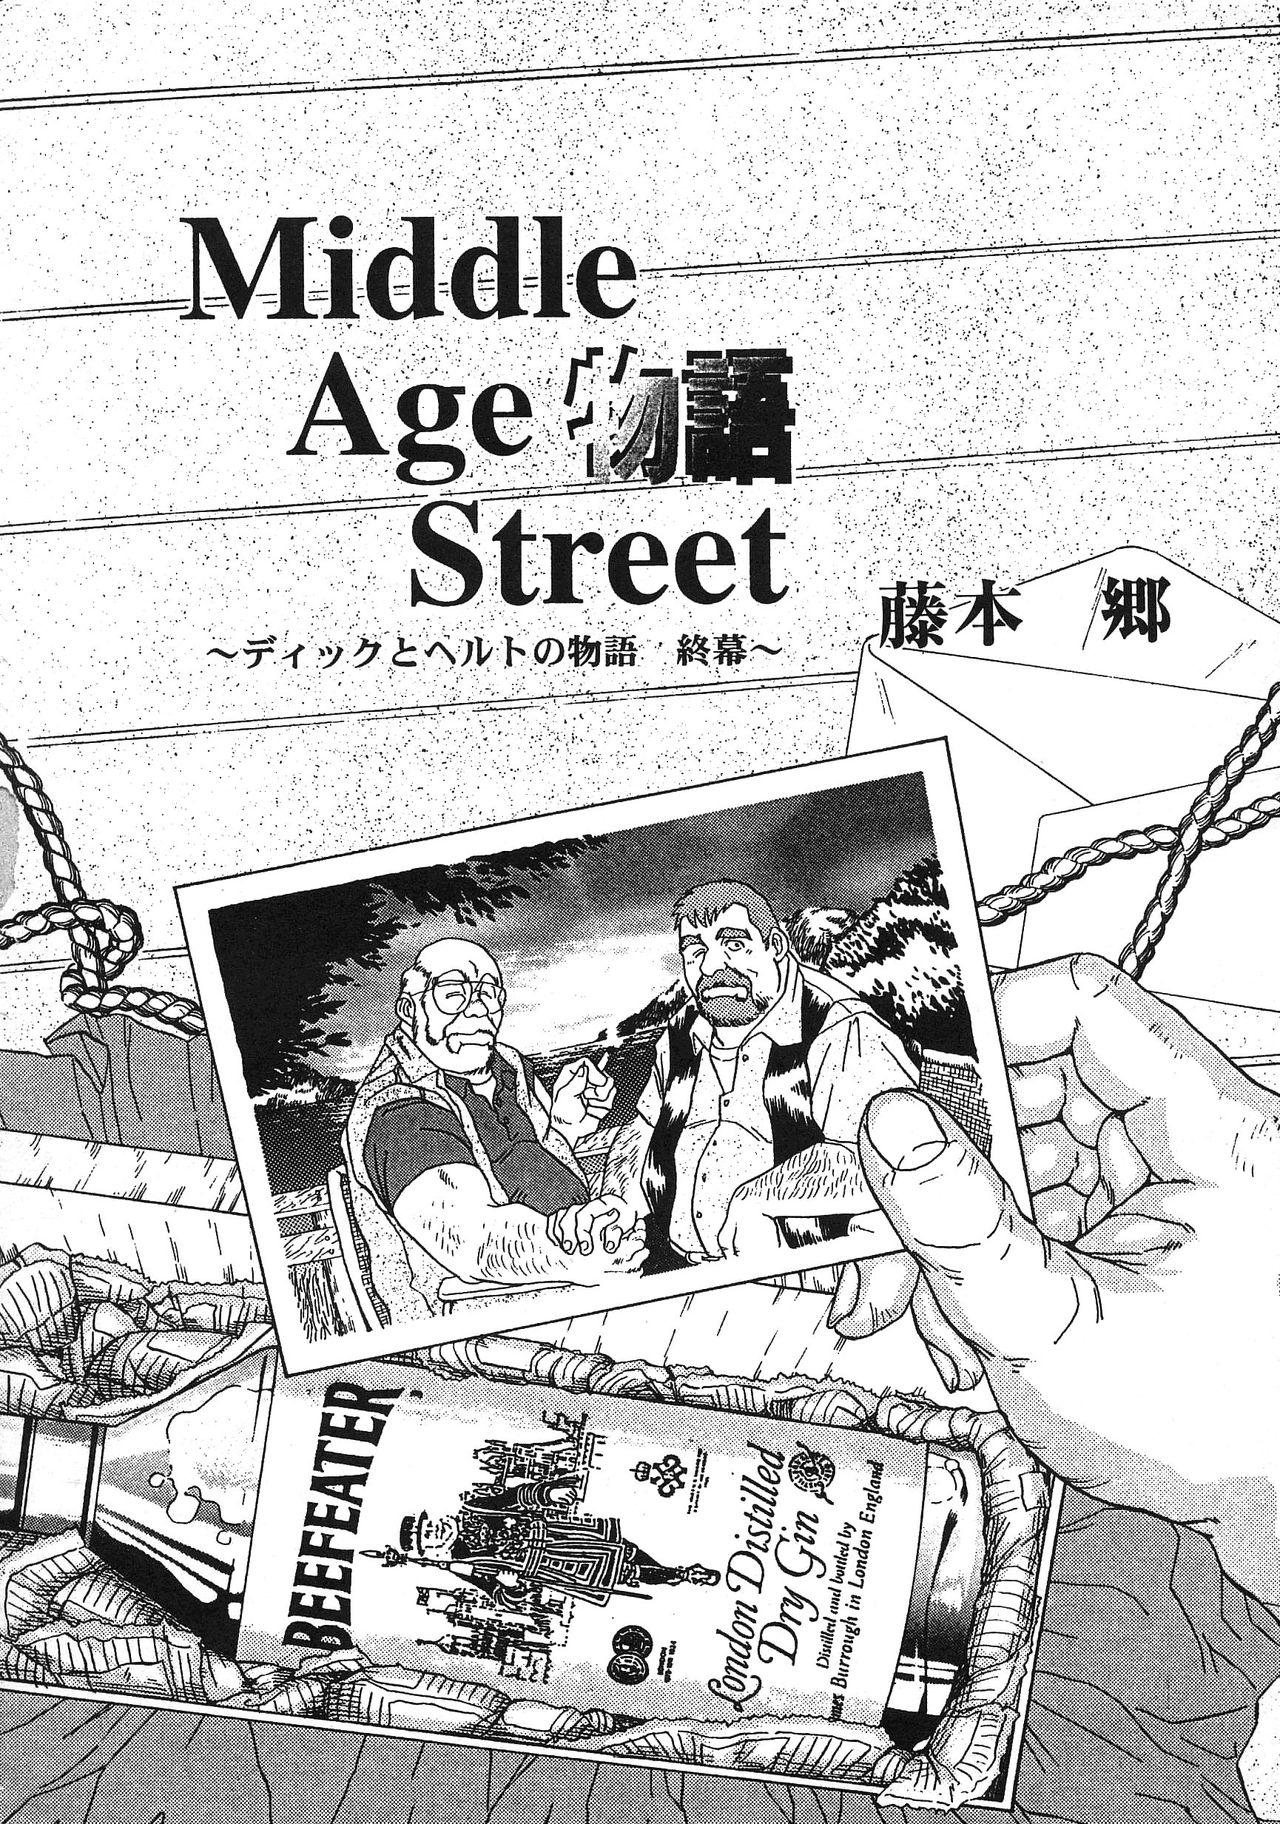 Middle Age Street Story 96